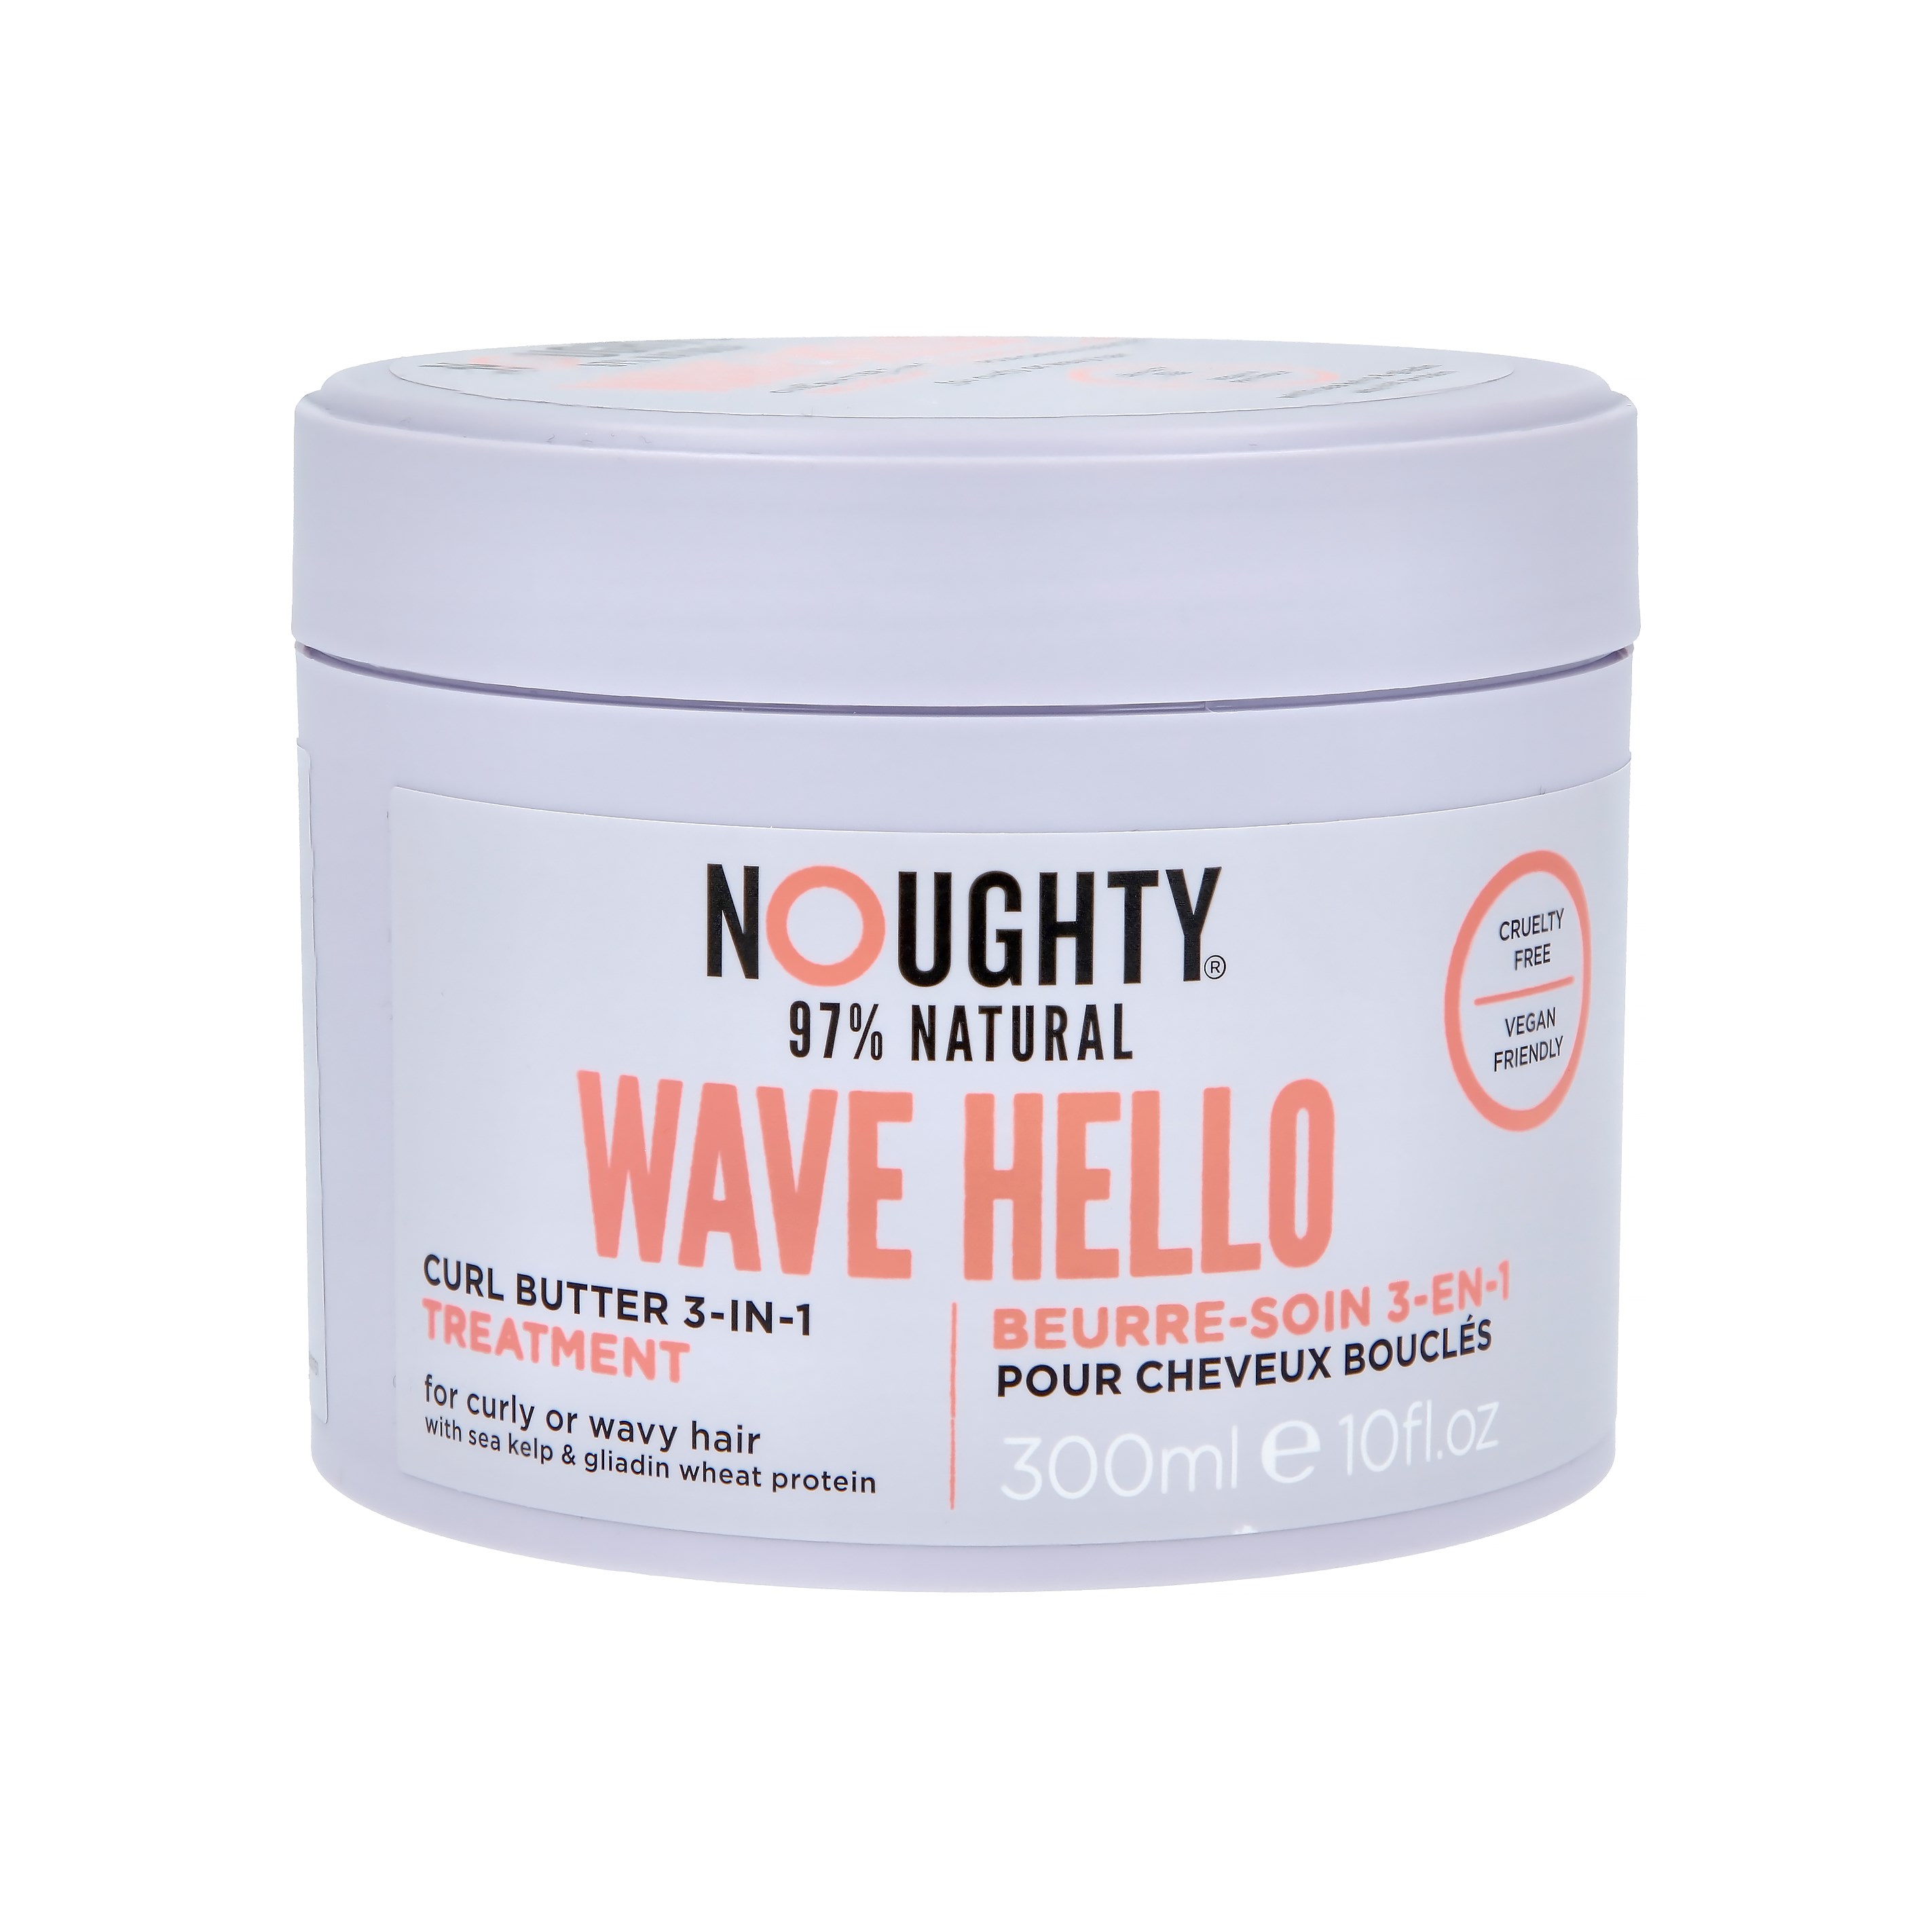 Läs mer om Noughty Wave Hello Curl Butter 3-in-1 Treatment 300 ml